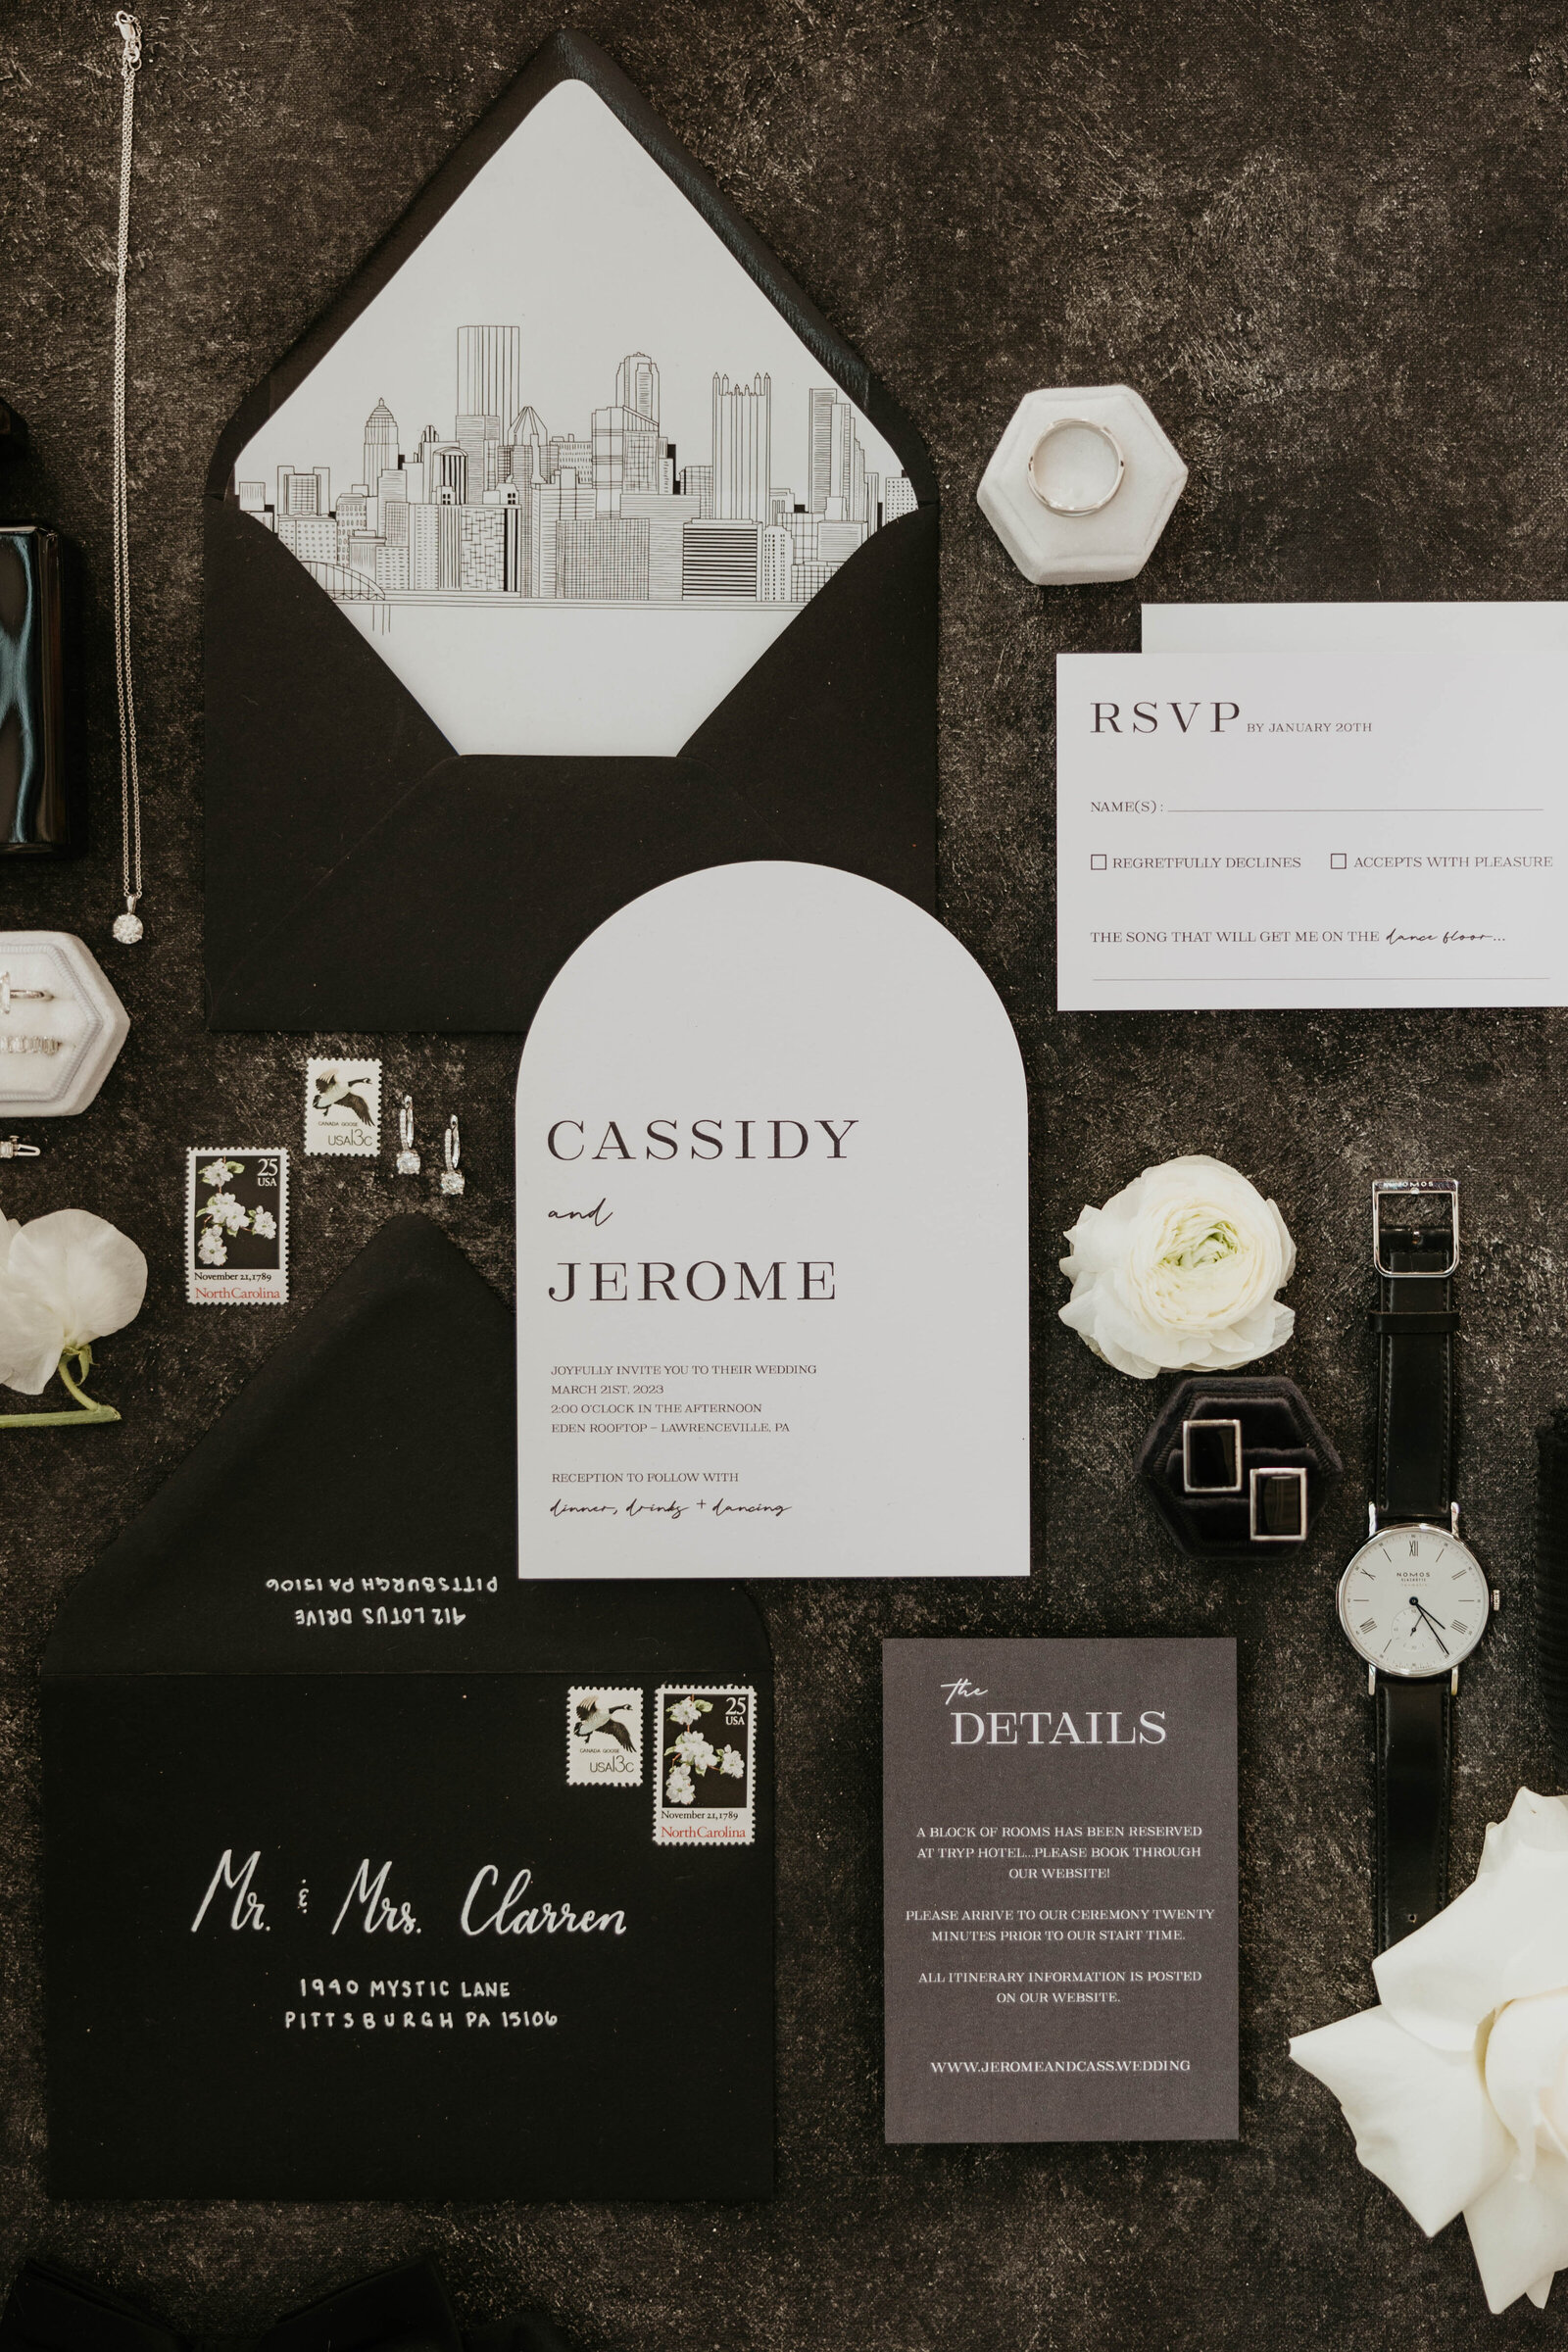 Discover the epitome of luxury with our exquisite black and white wedding invitation. Designed to complement your lavish celebration, this elegant and timeless design sets the tone for an unforgettable wedding. Contact our luxury wedding planning services for a seamless and opulent experience.